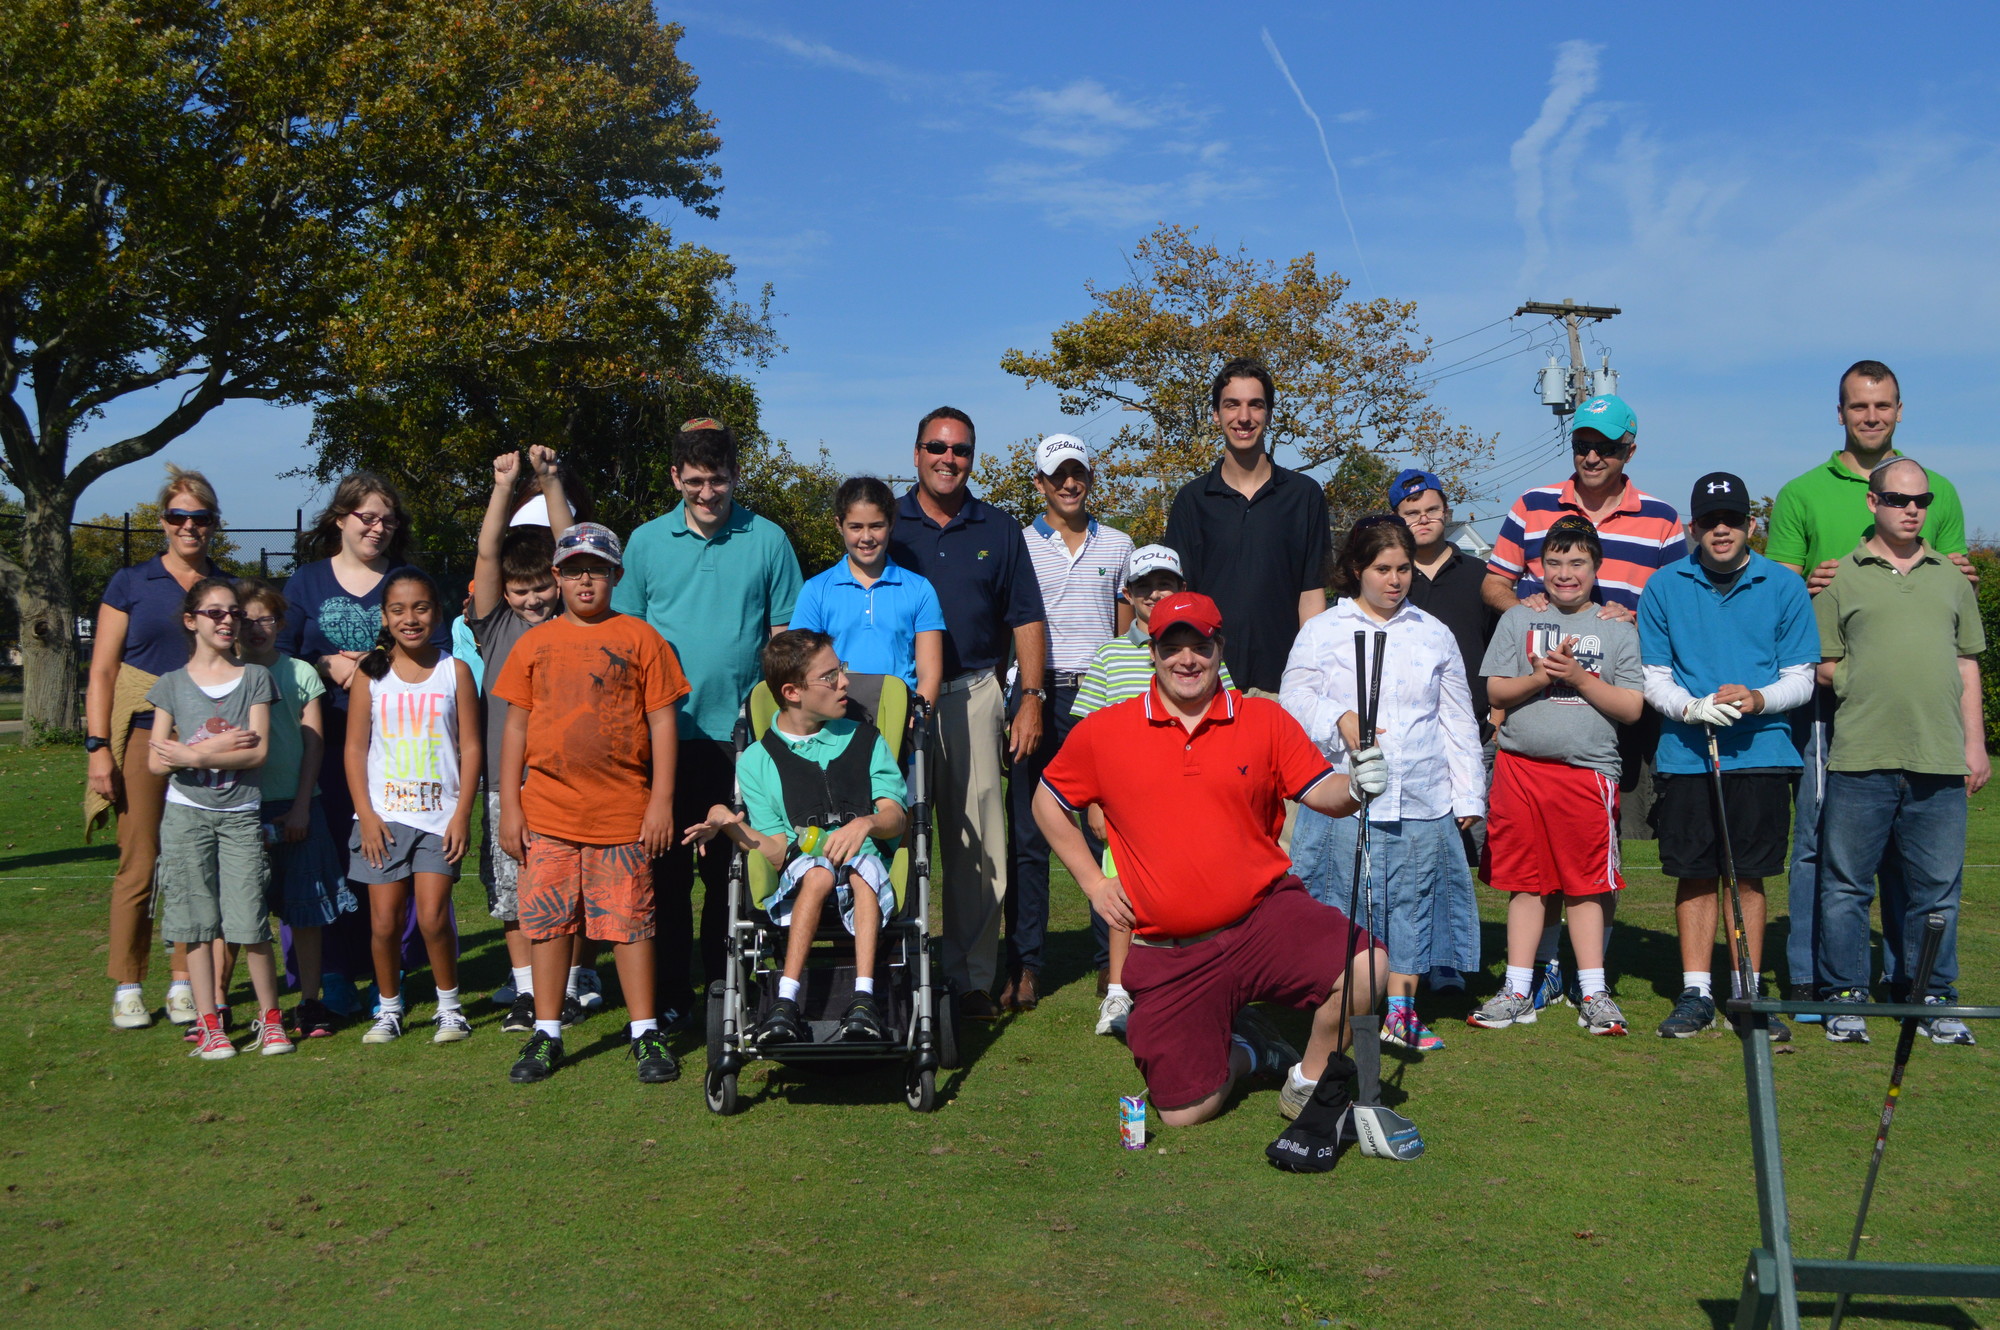 The Woodmere Club hosted the JCC of the Greater Five Towns “Play Golf” clinic for children and young adults with special needs.